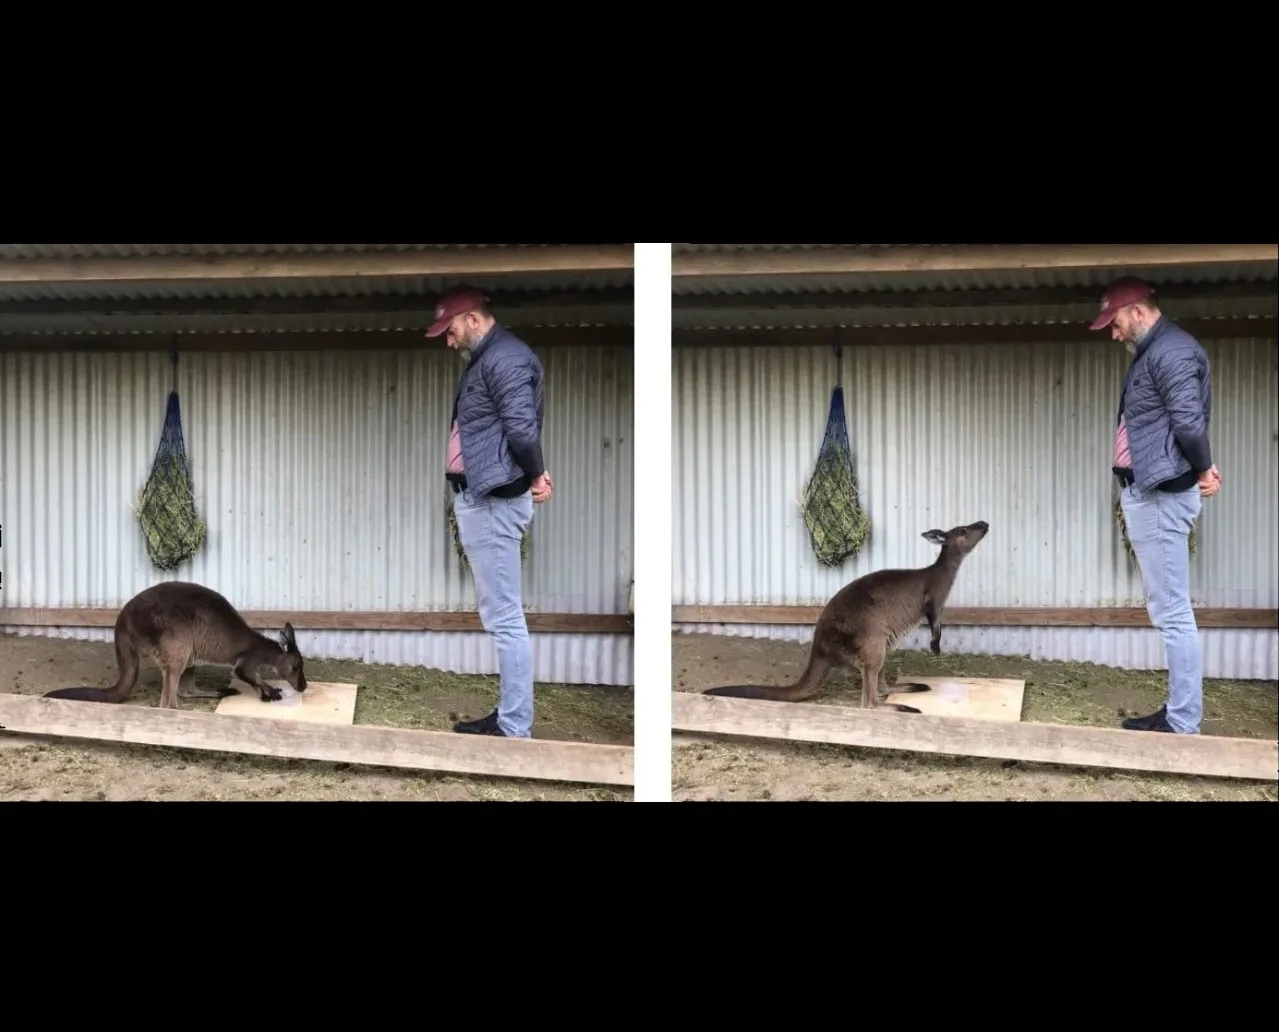 Kangaroos Communicate With Humans Like Dogs in Experiments | Smart News|  Smithsonian Magazine